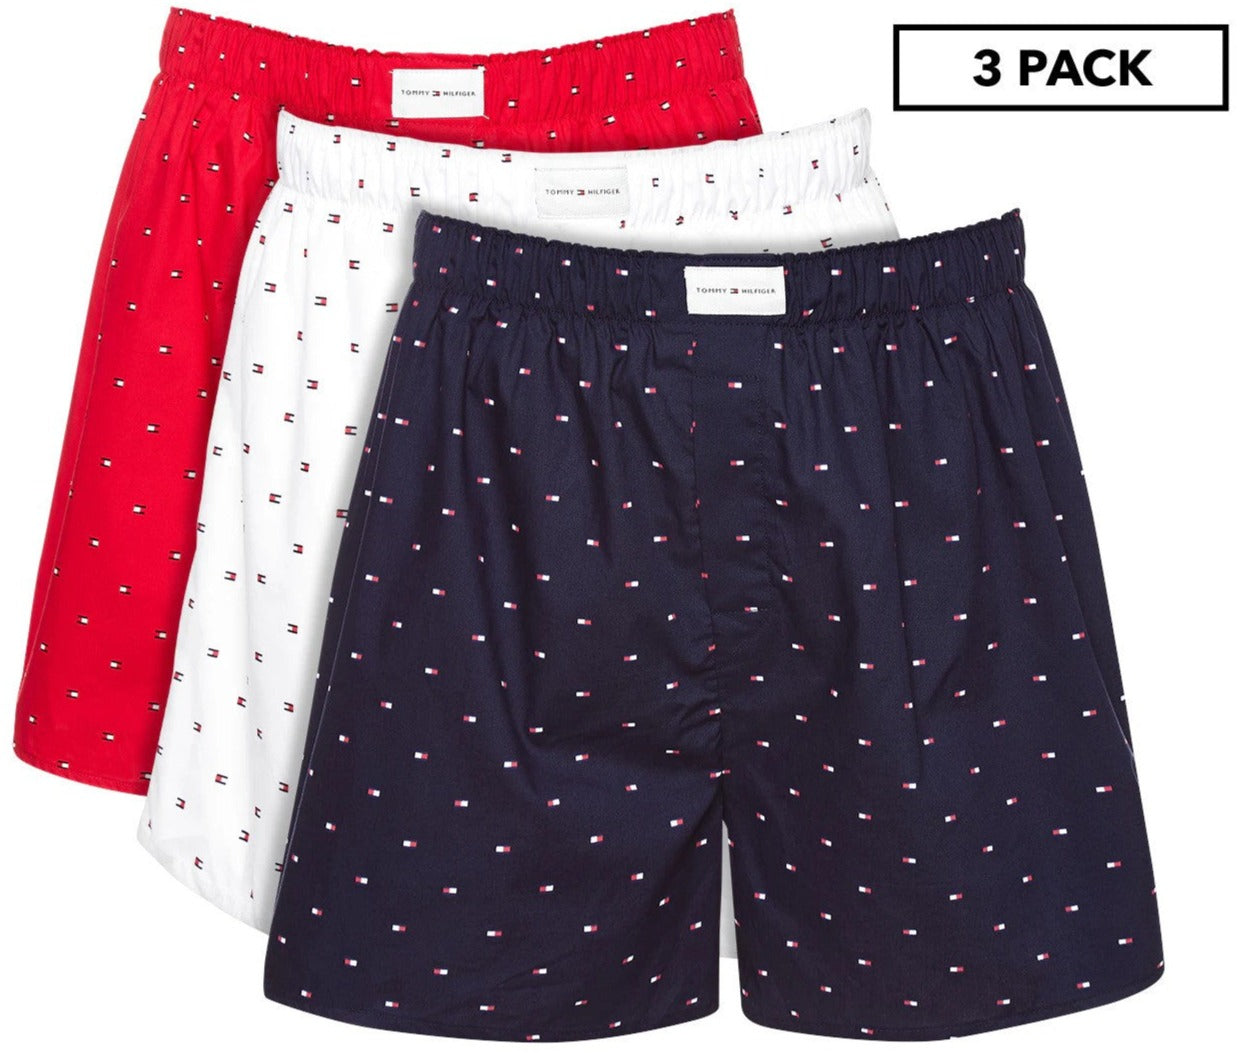 Tommy Hilfiger Men's Cotton Classics Woven Boxers 3-Pack - Navy/Red/White